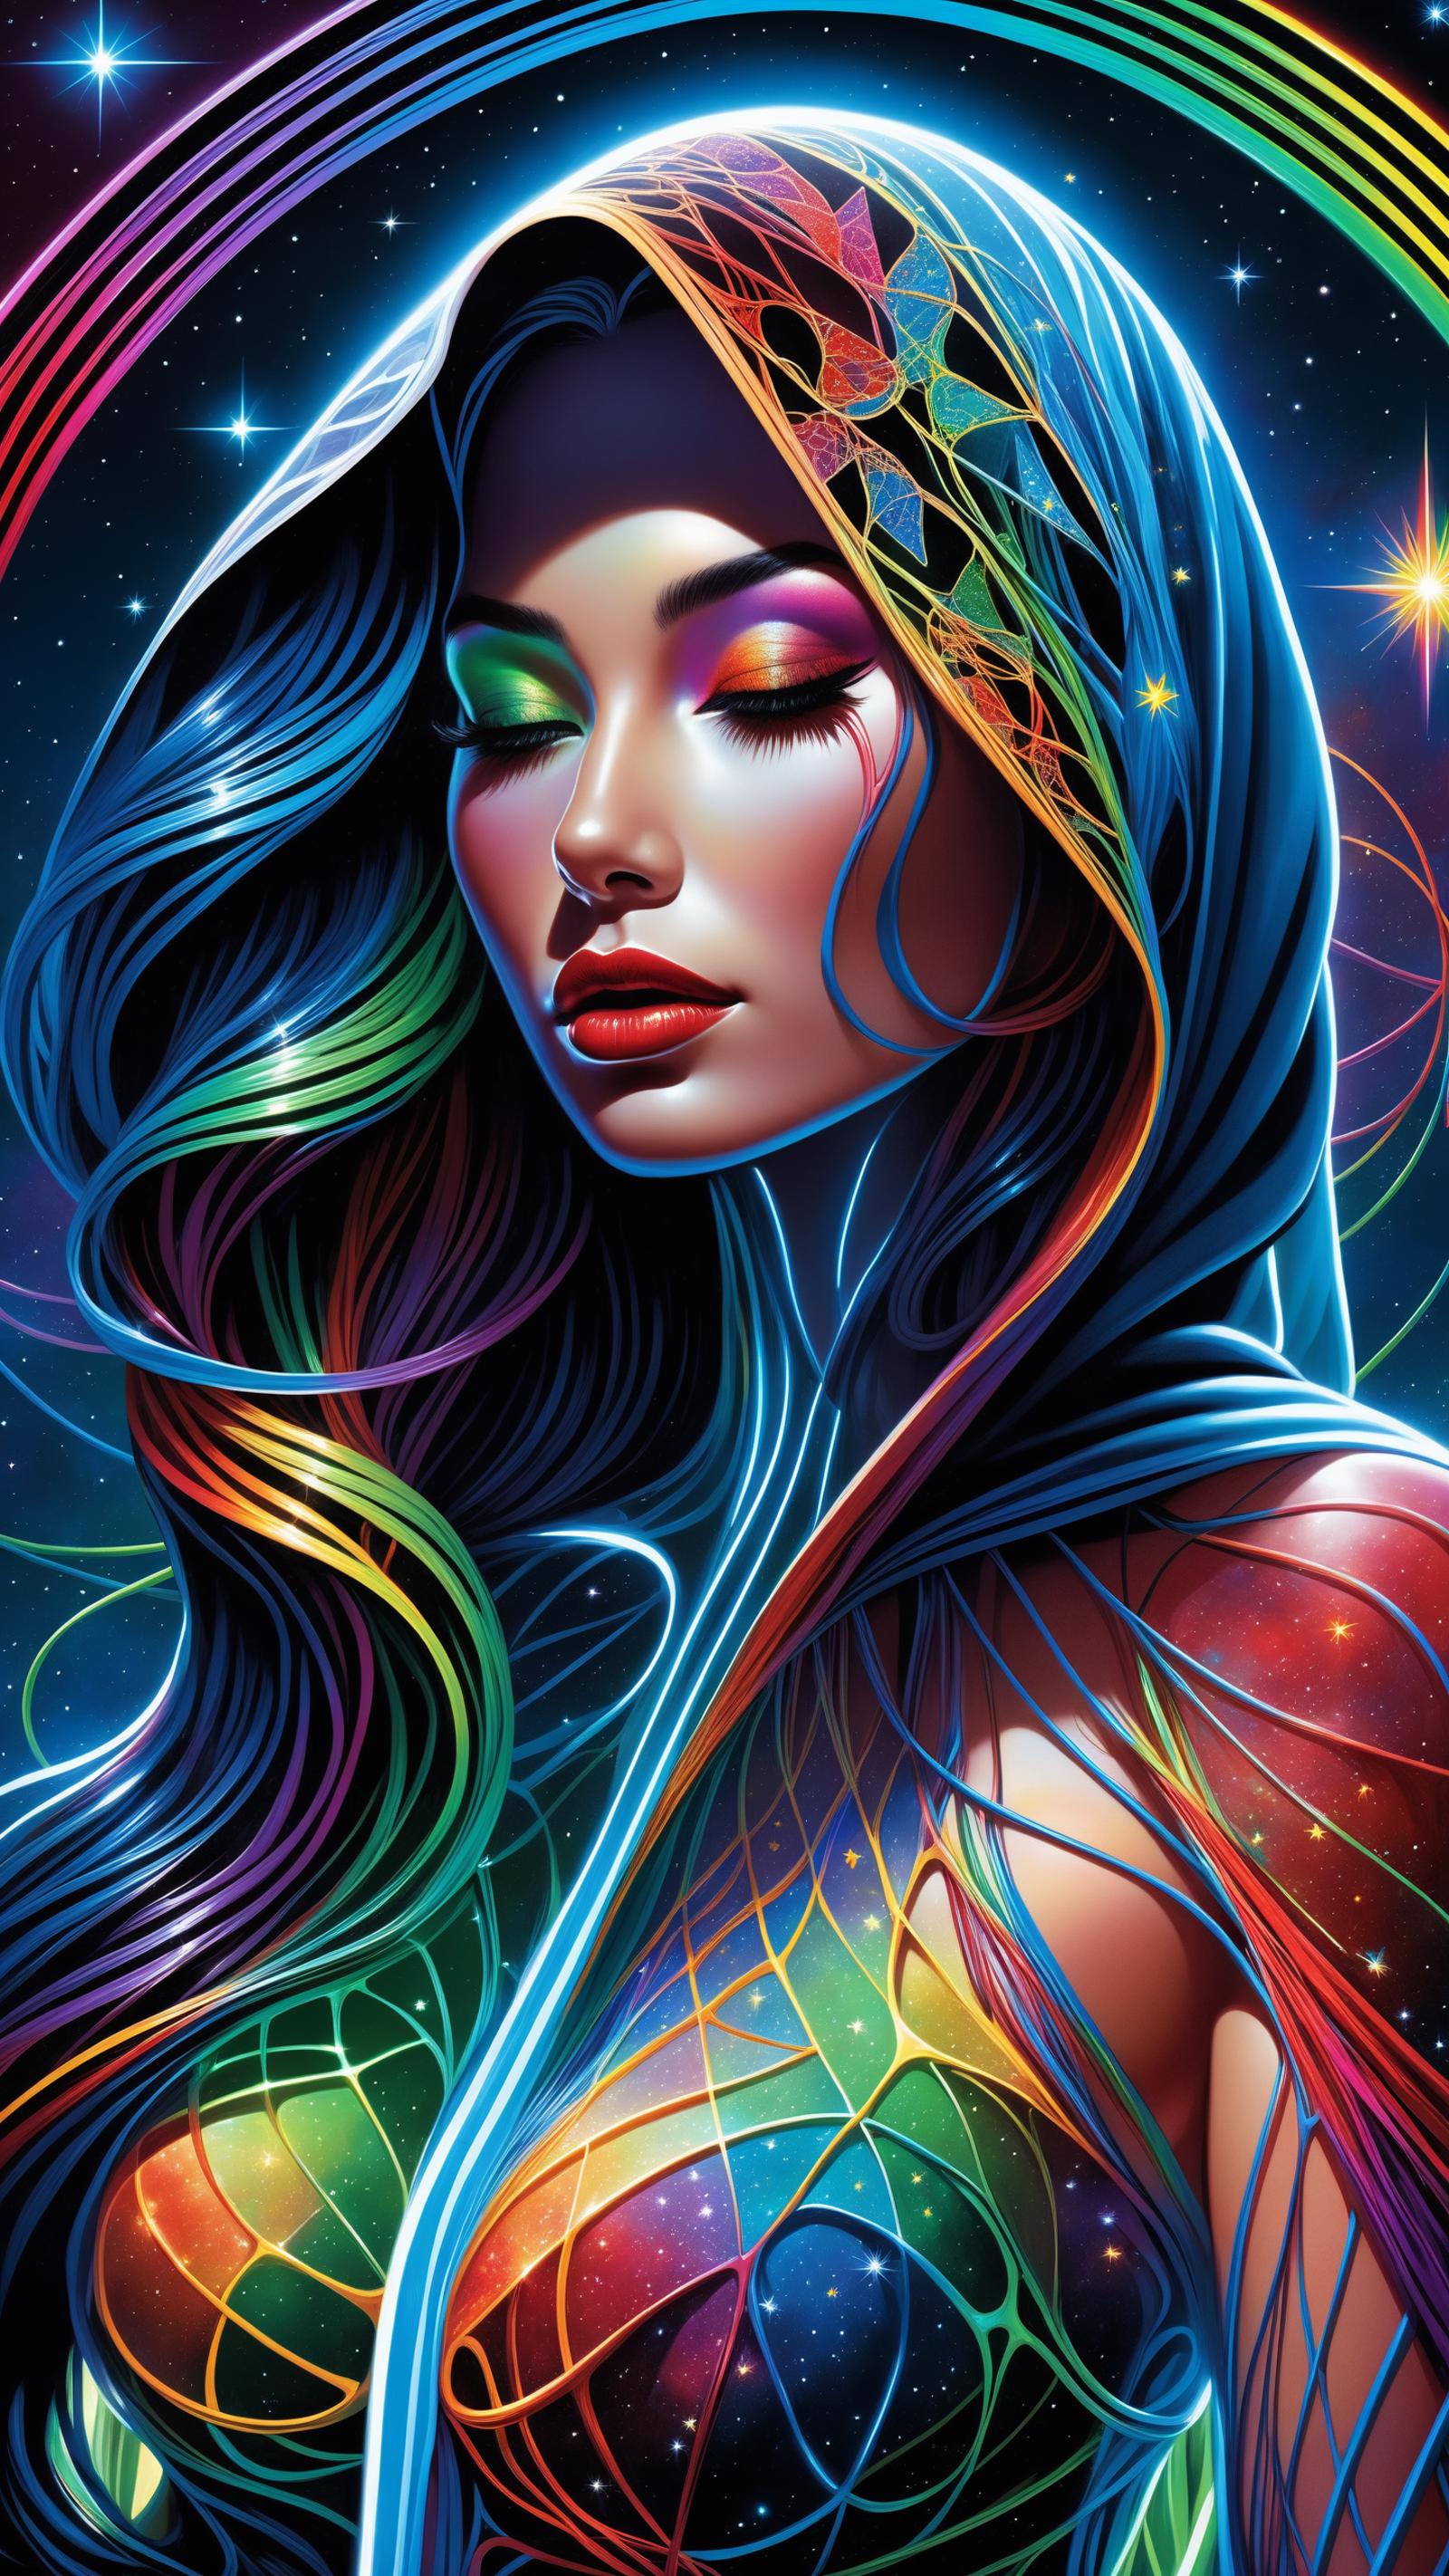 Colorful Digital Art of a Woman with Rainbow Hair and Makeup